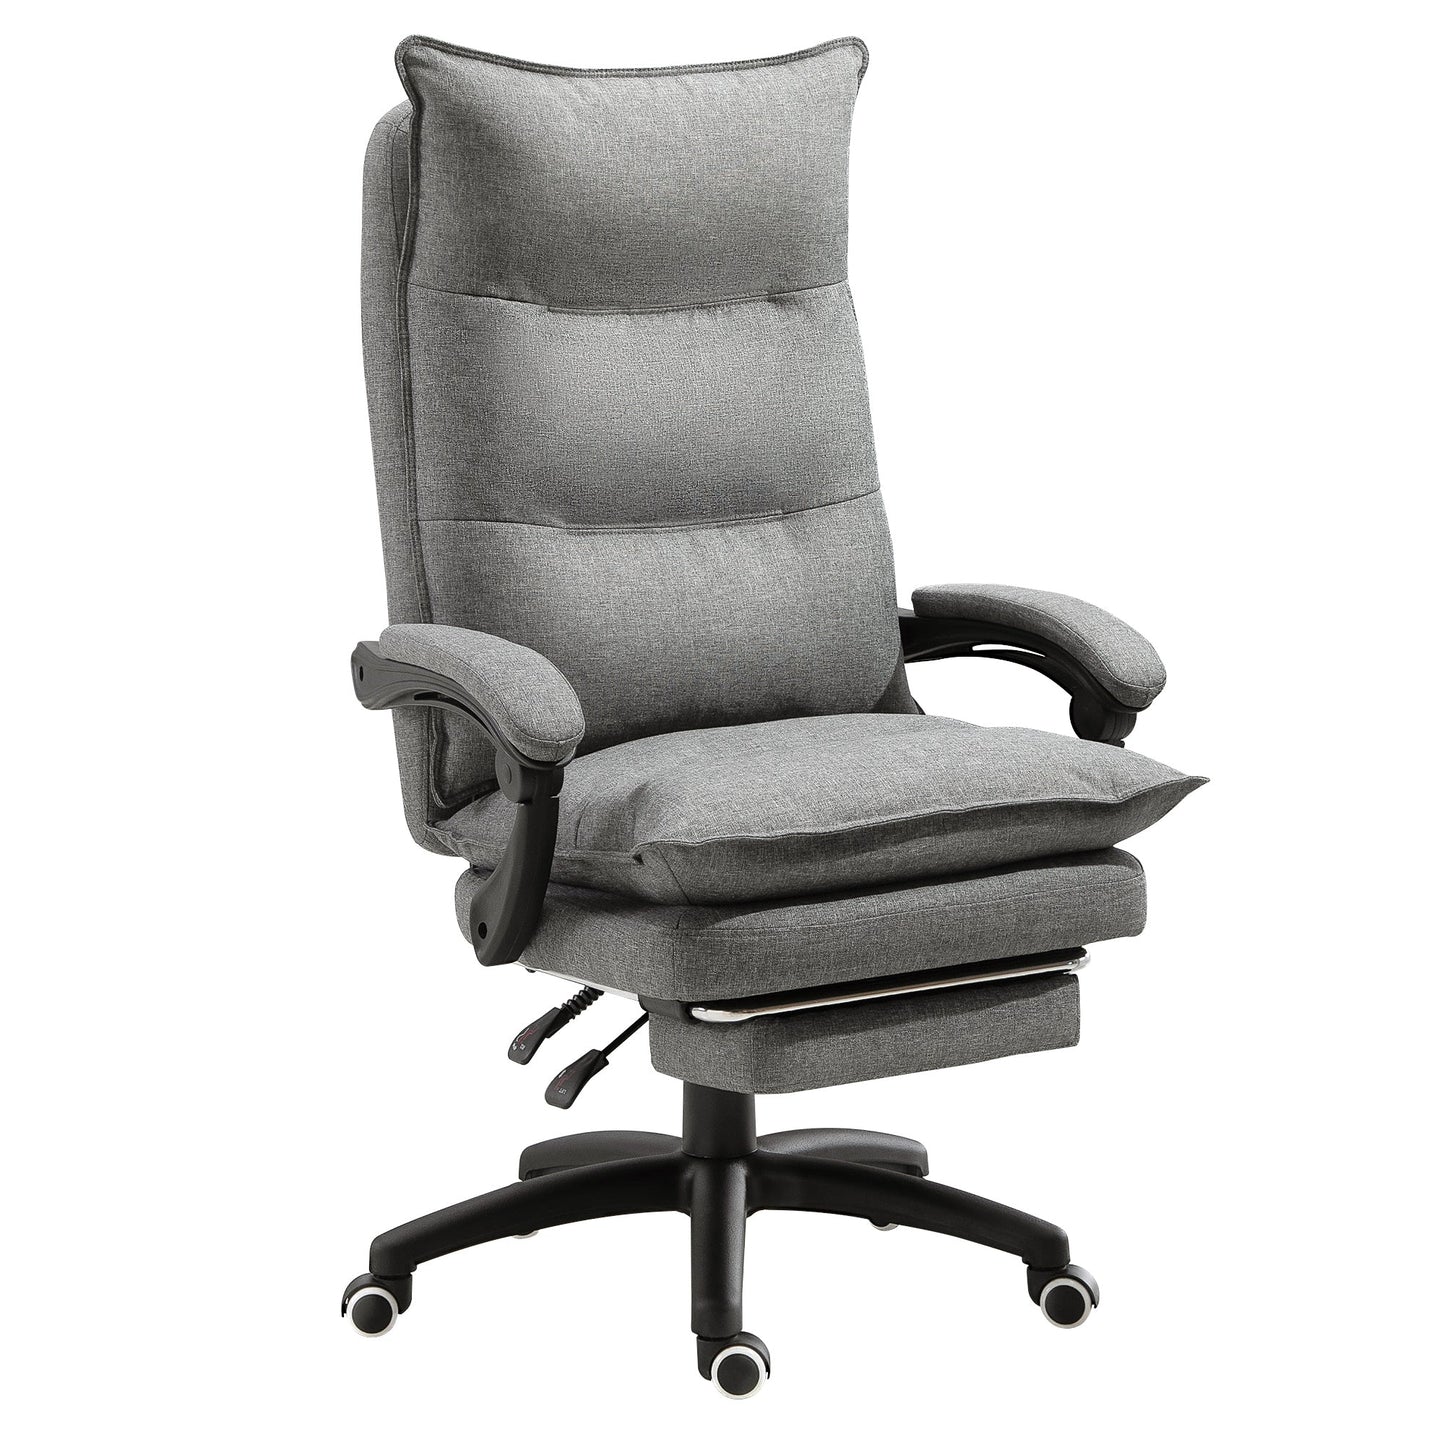 Padded office chair with 6 massage points, adjustable height and wheels, 70x62x120-130 cm, Grey